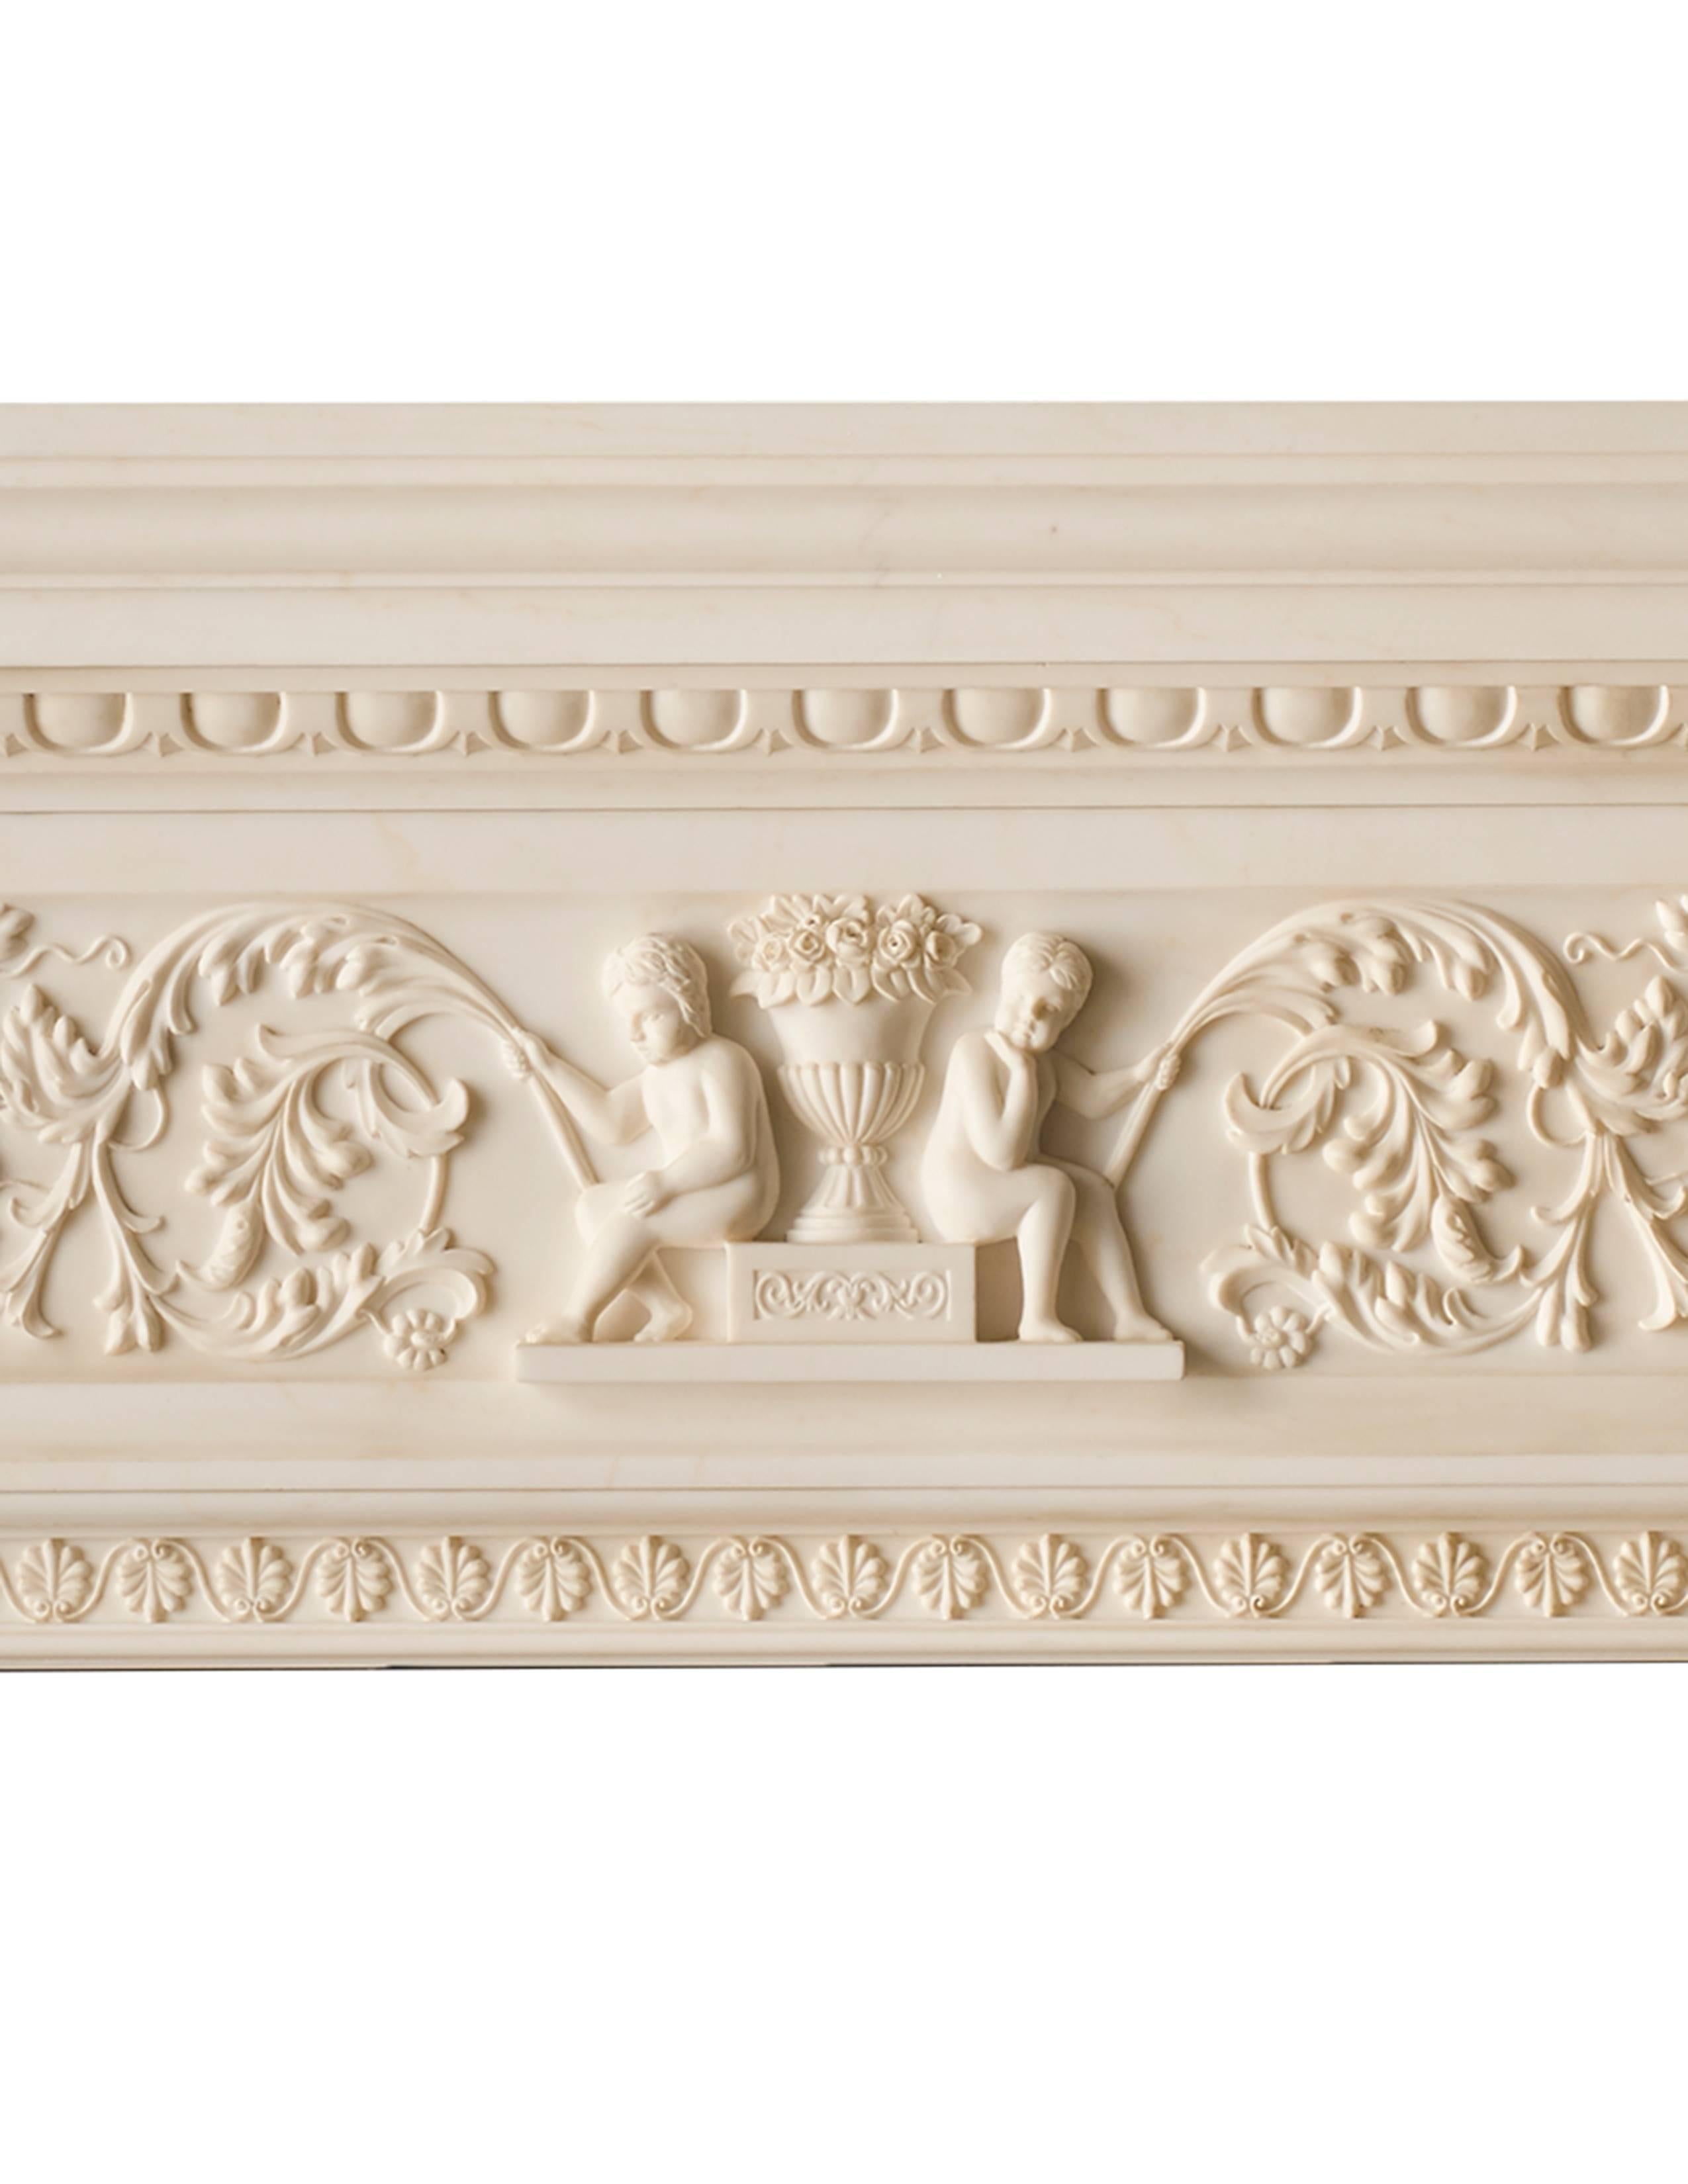 Part of The Suzanne Tucker collaborative line with Chesney's. A celebration of the Italian decorative arts, the Bellagio is inspired by a favorite spot on Lake Como. Its fanciful design with beautifully carved detailing and free-standing columns